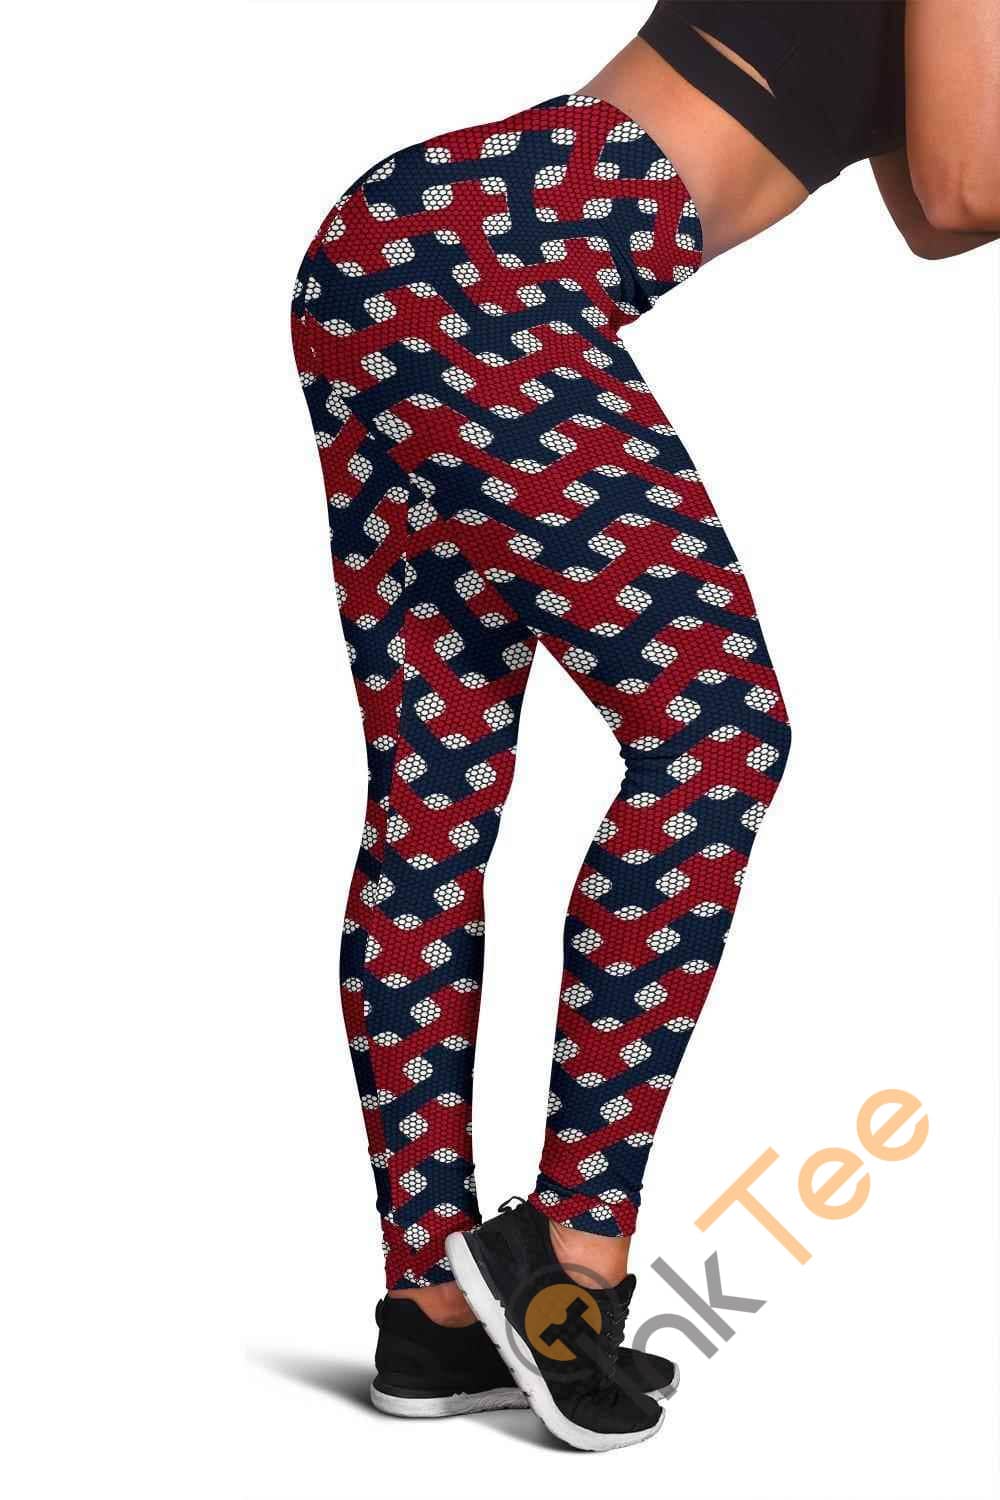 Inktee Store - Ole Miss Rebels Inspired 3D All Over Print For Yoga Fitness Fashion Women'S Leggings Image